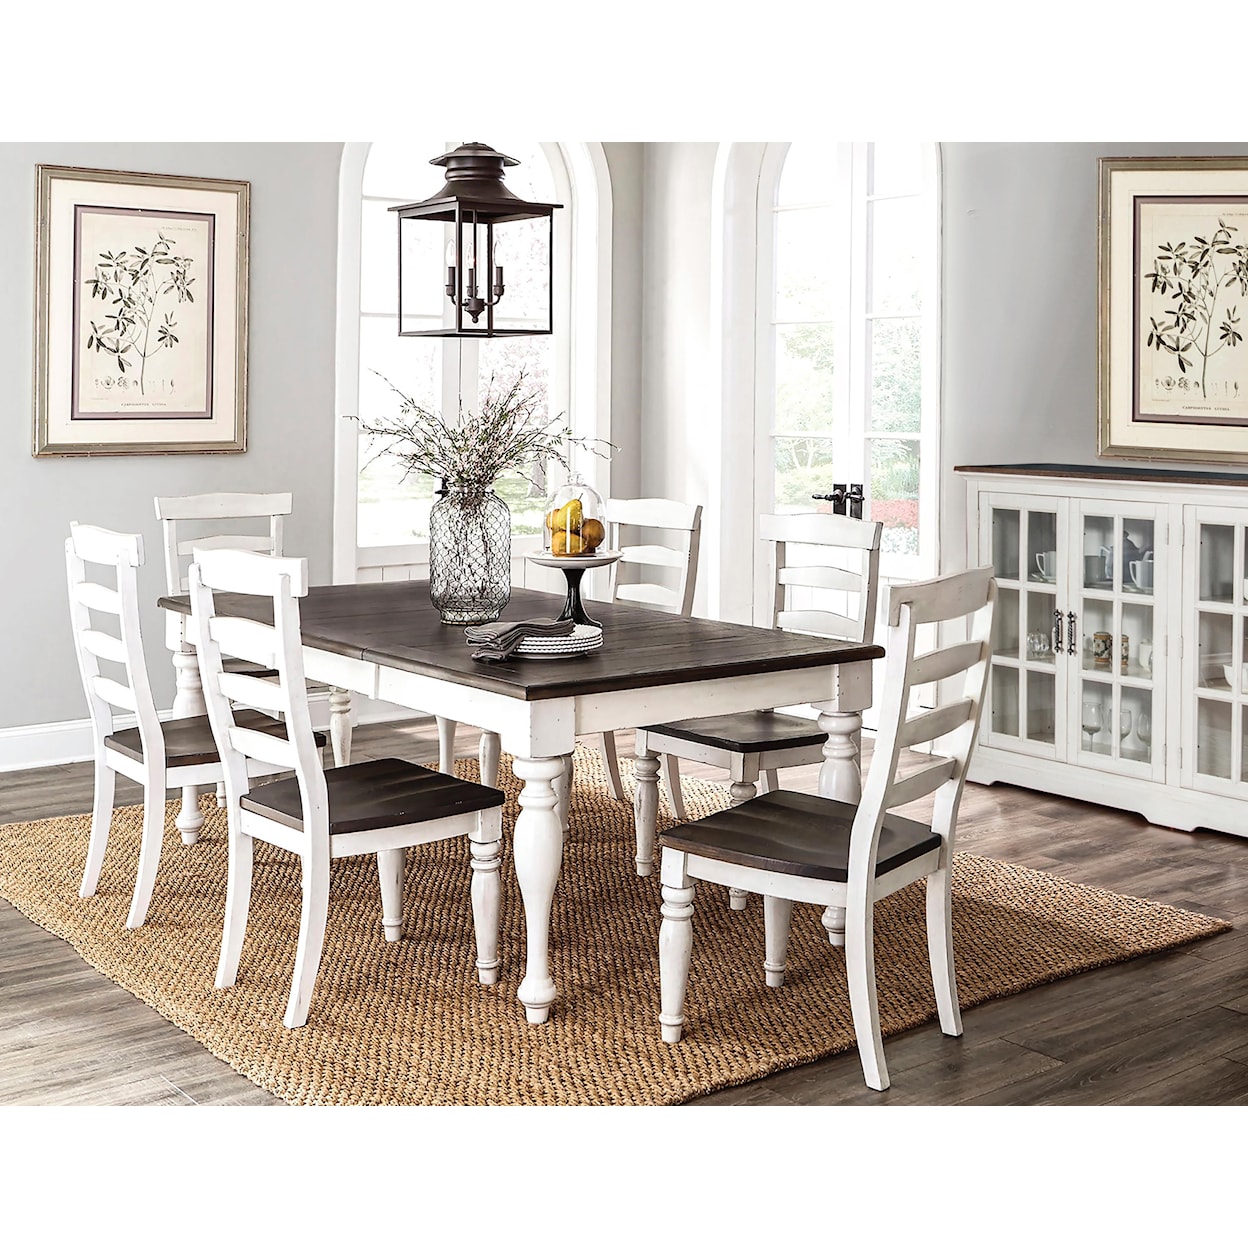 Sunny Designs Carriage House 5-Piece Table and Chair Set